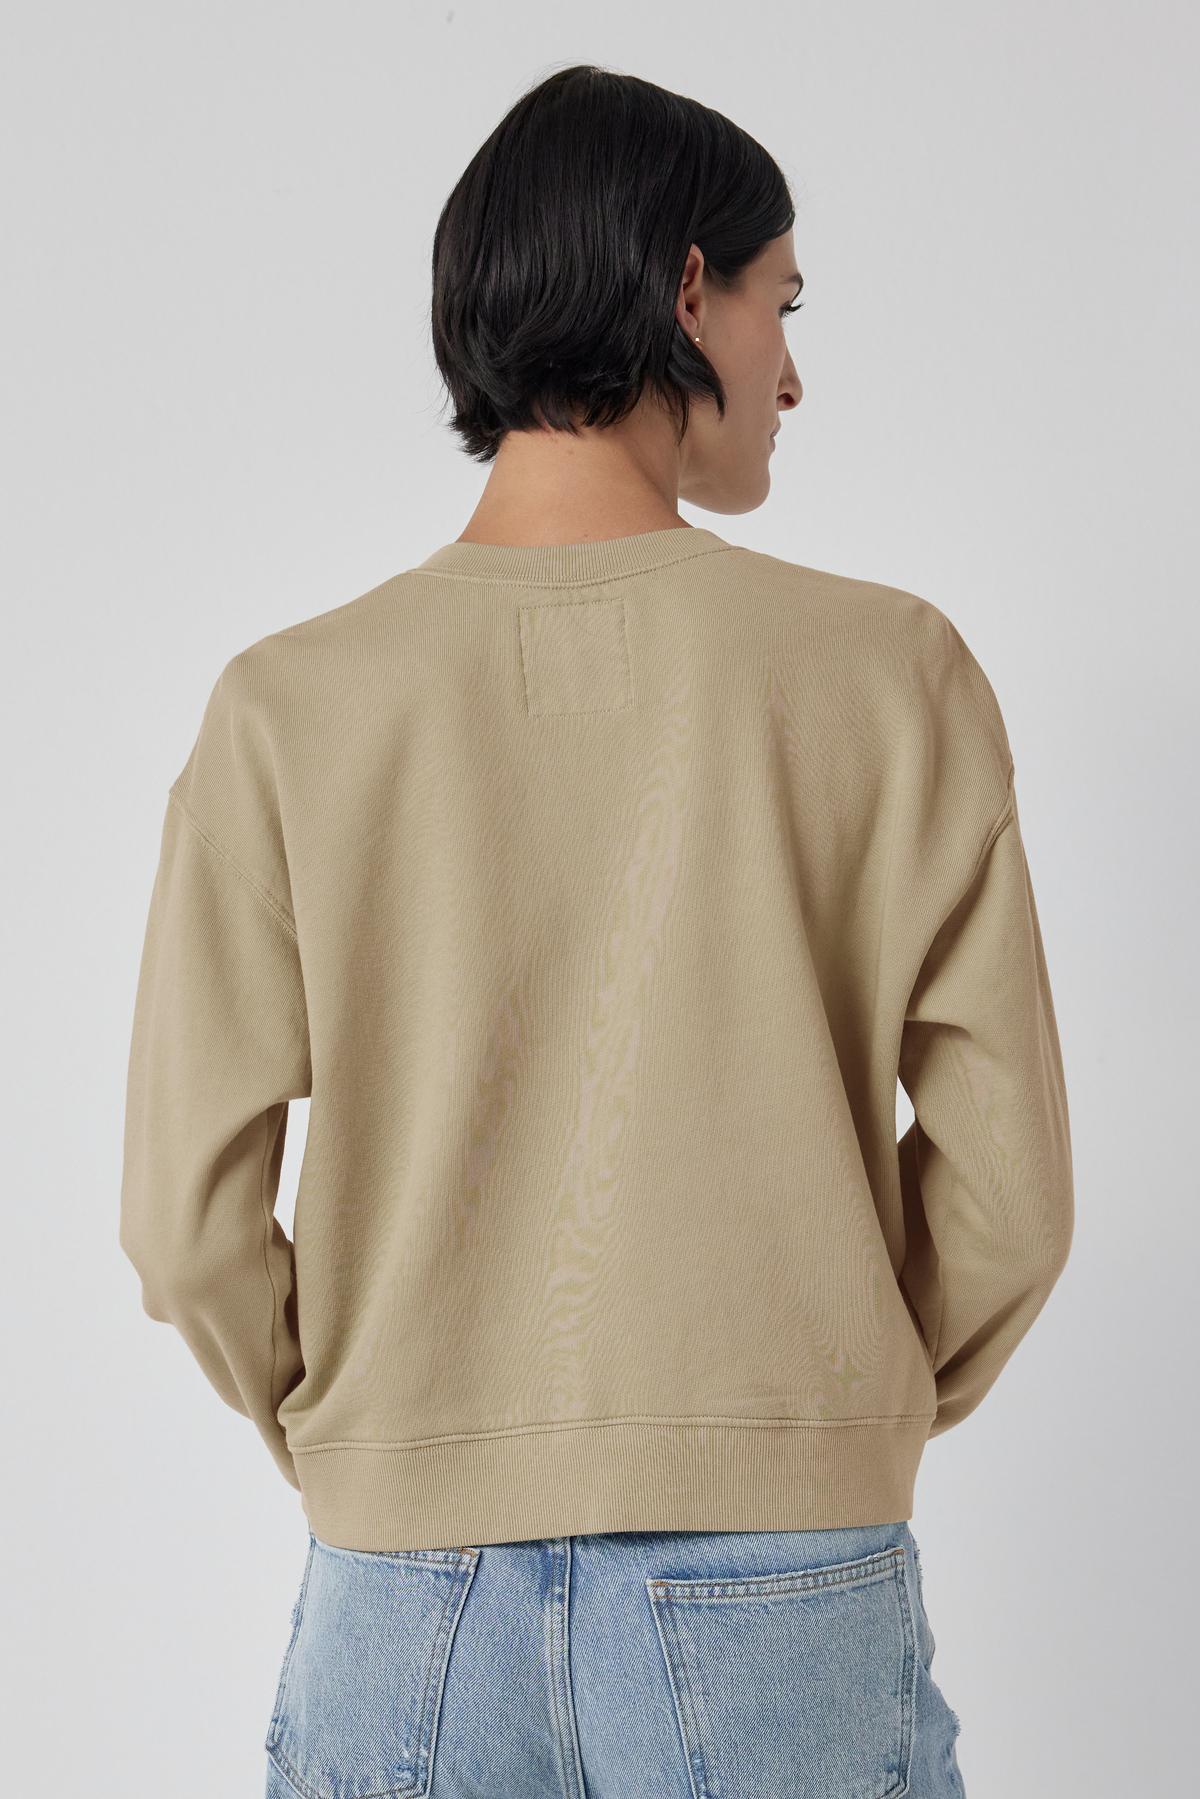 A woman seen from behind wearing a beige Ynez Sweatshirt by Velvet by Jenny Graham and blue jeans.-36463630844097